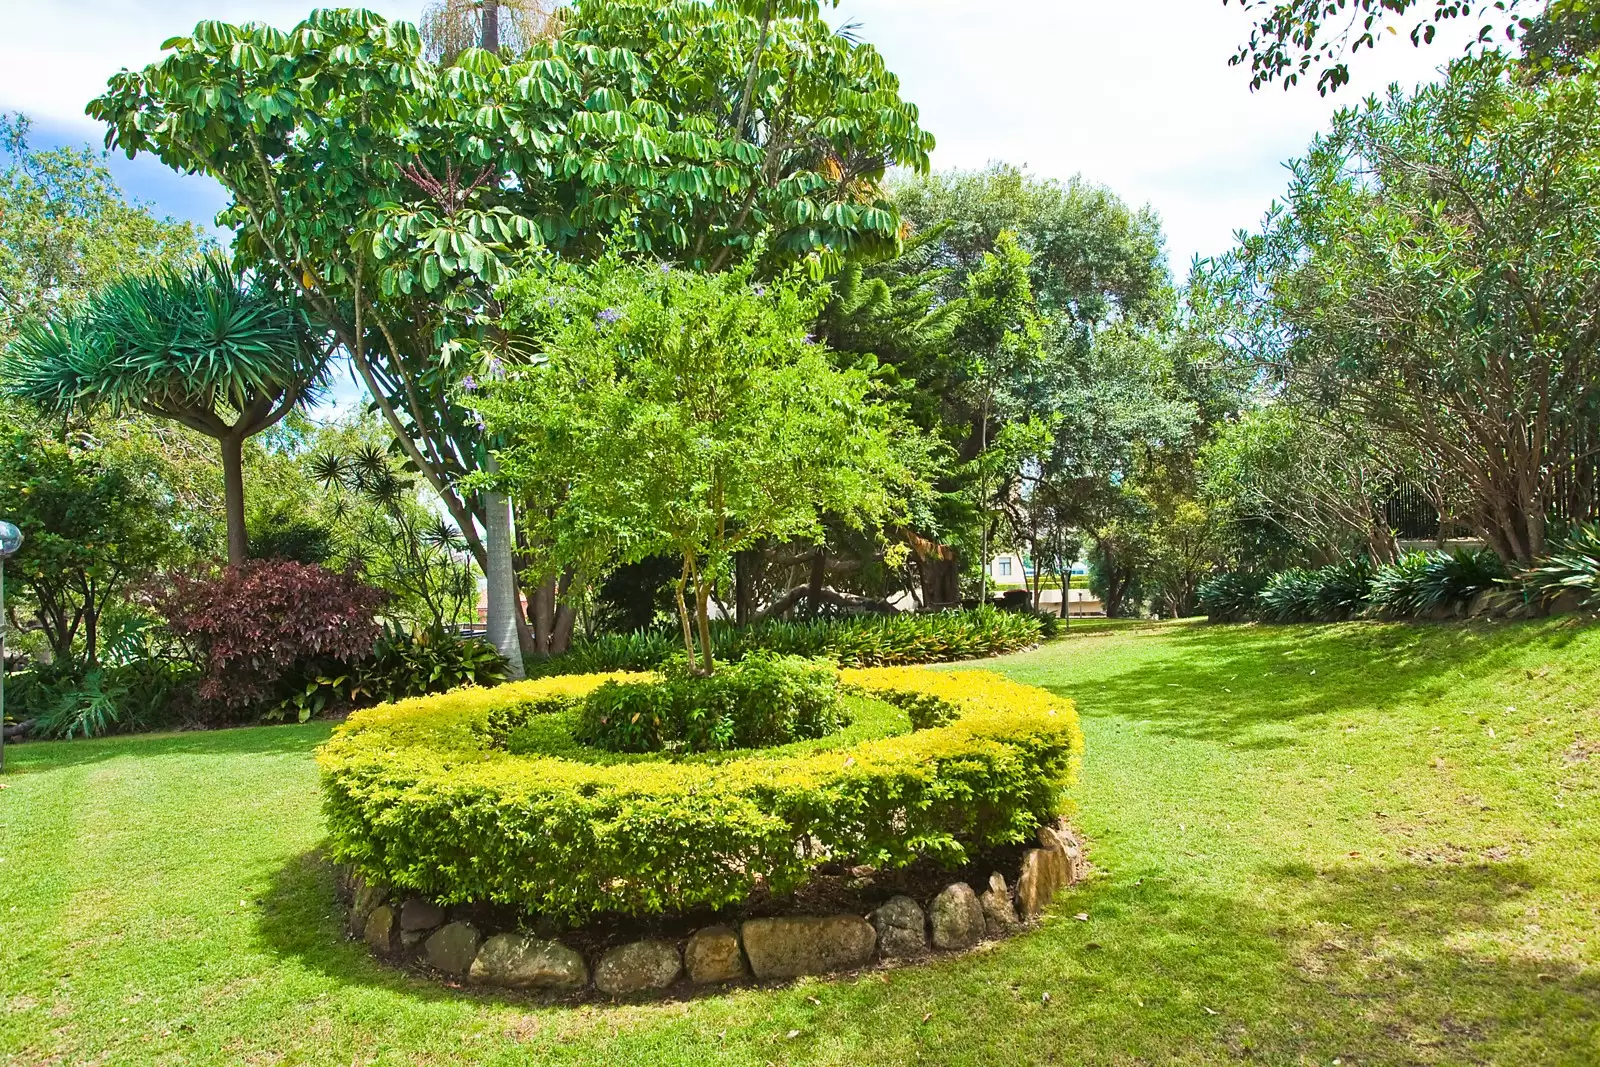 Photo #18: 1C/3 Darling Point Road, Darling Point - Sold by Sydney Sotheby's International Realty